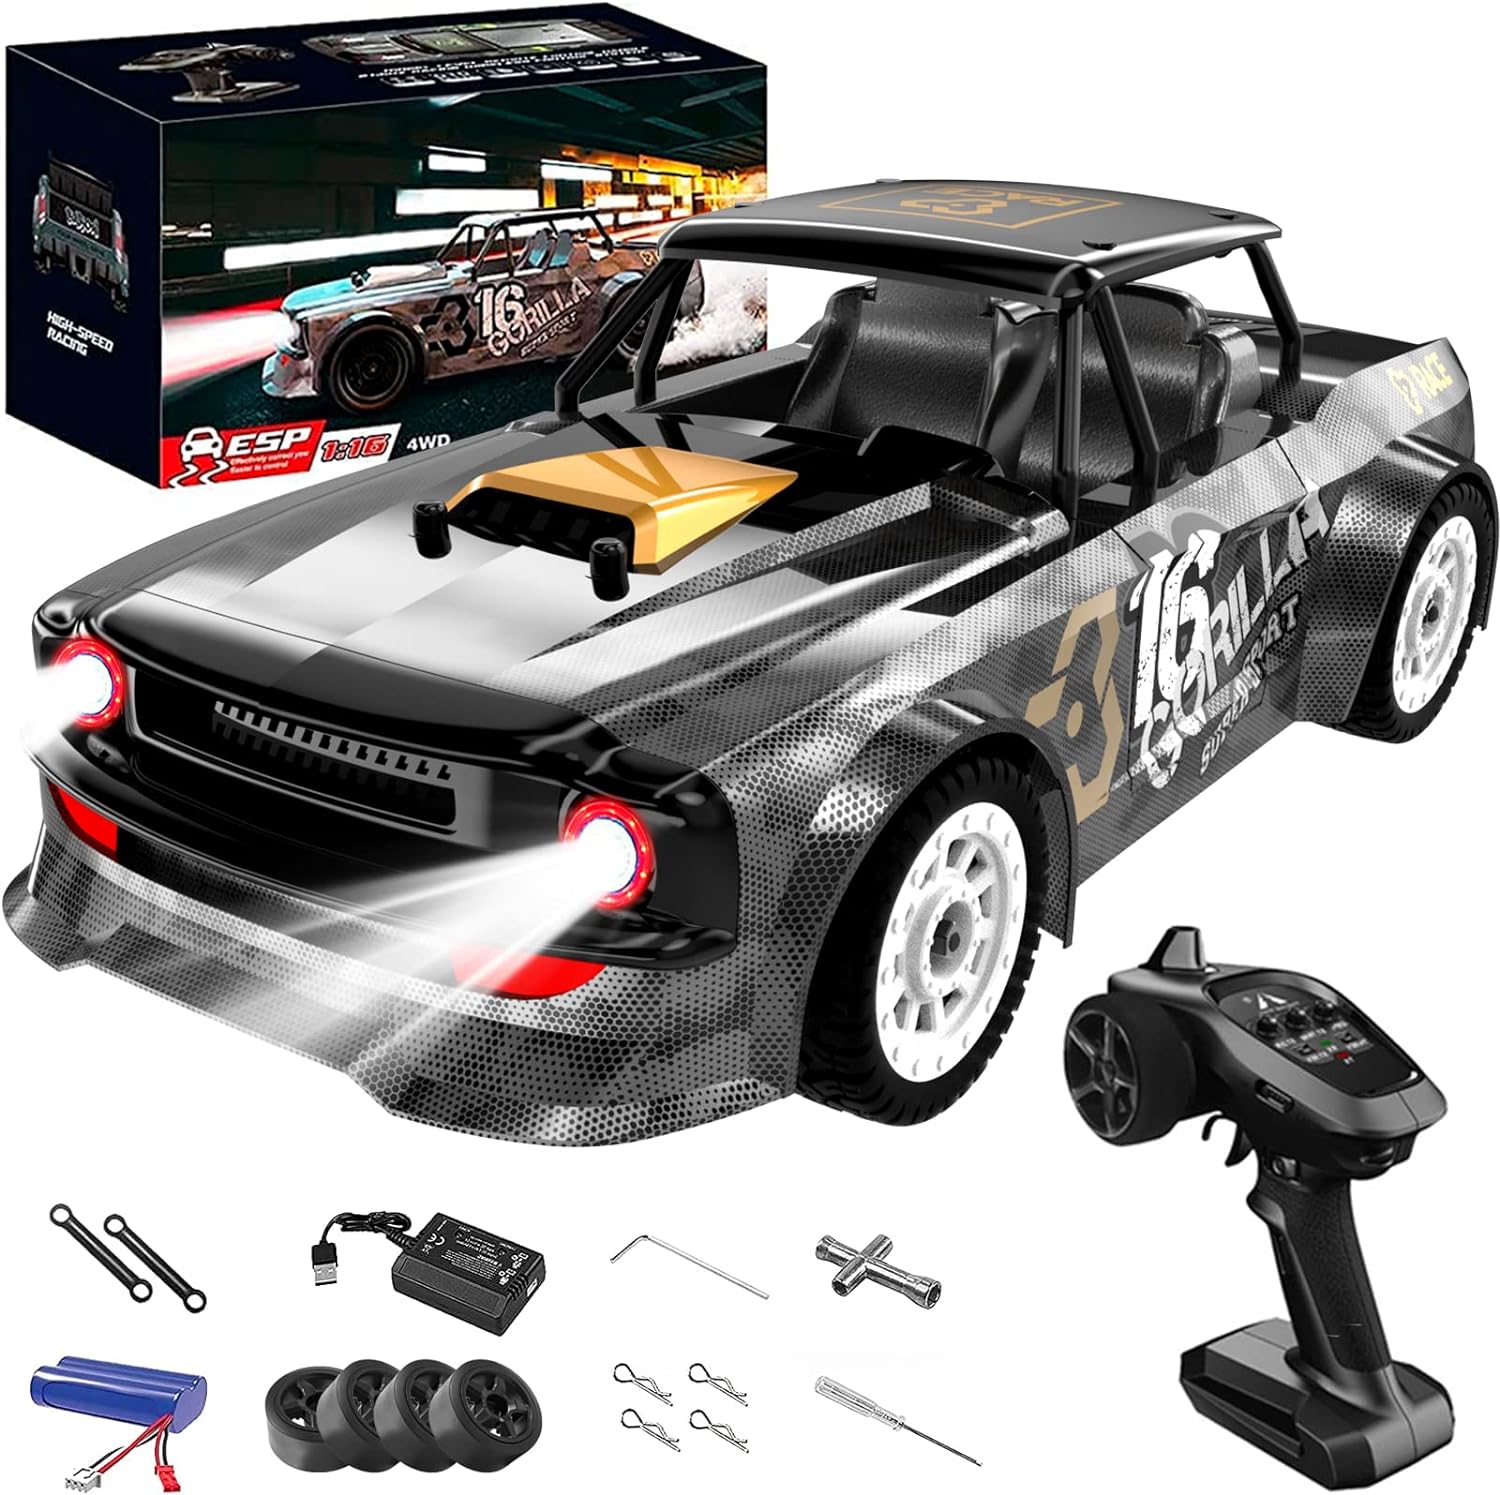 supdex remote control high speed car review